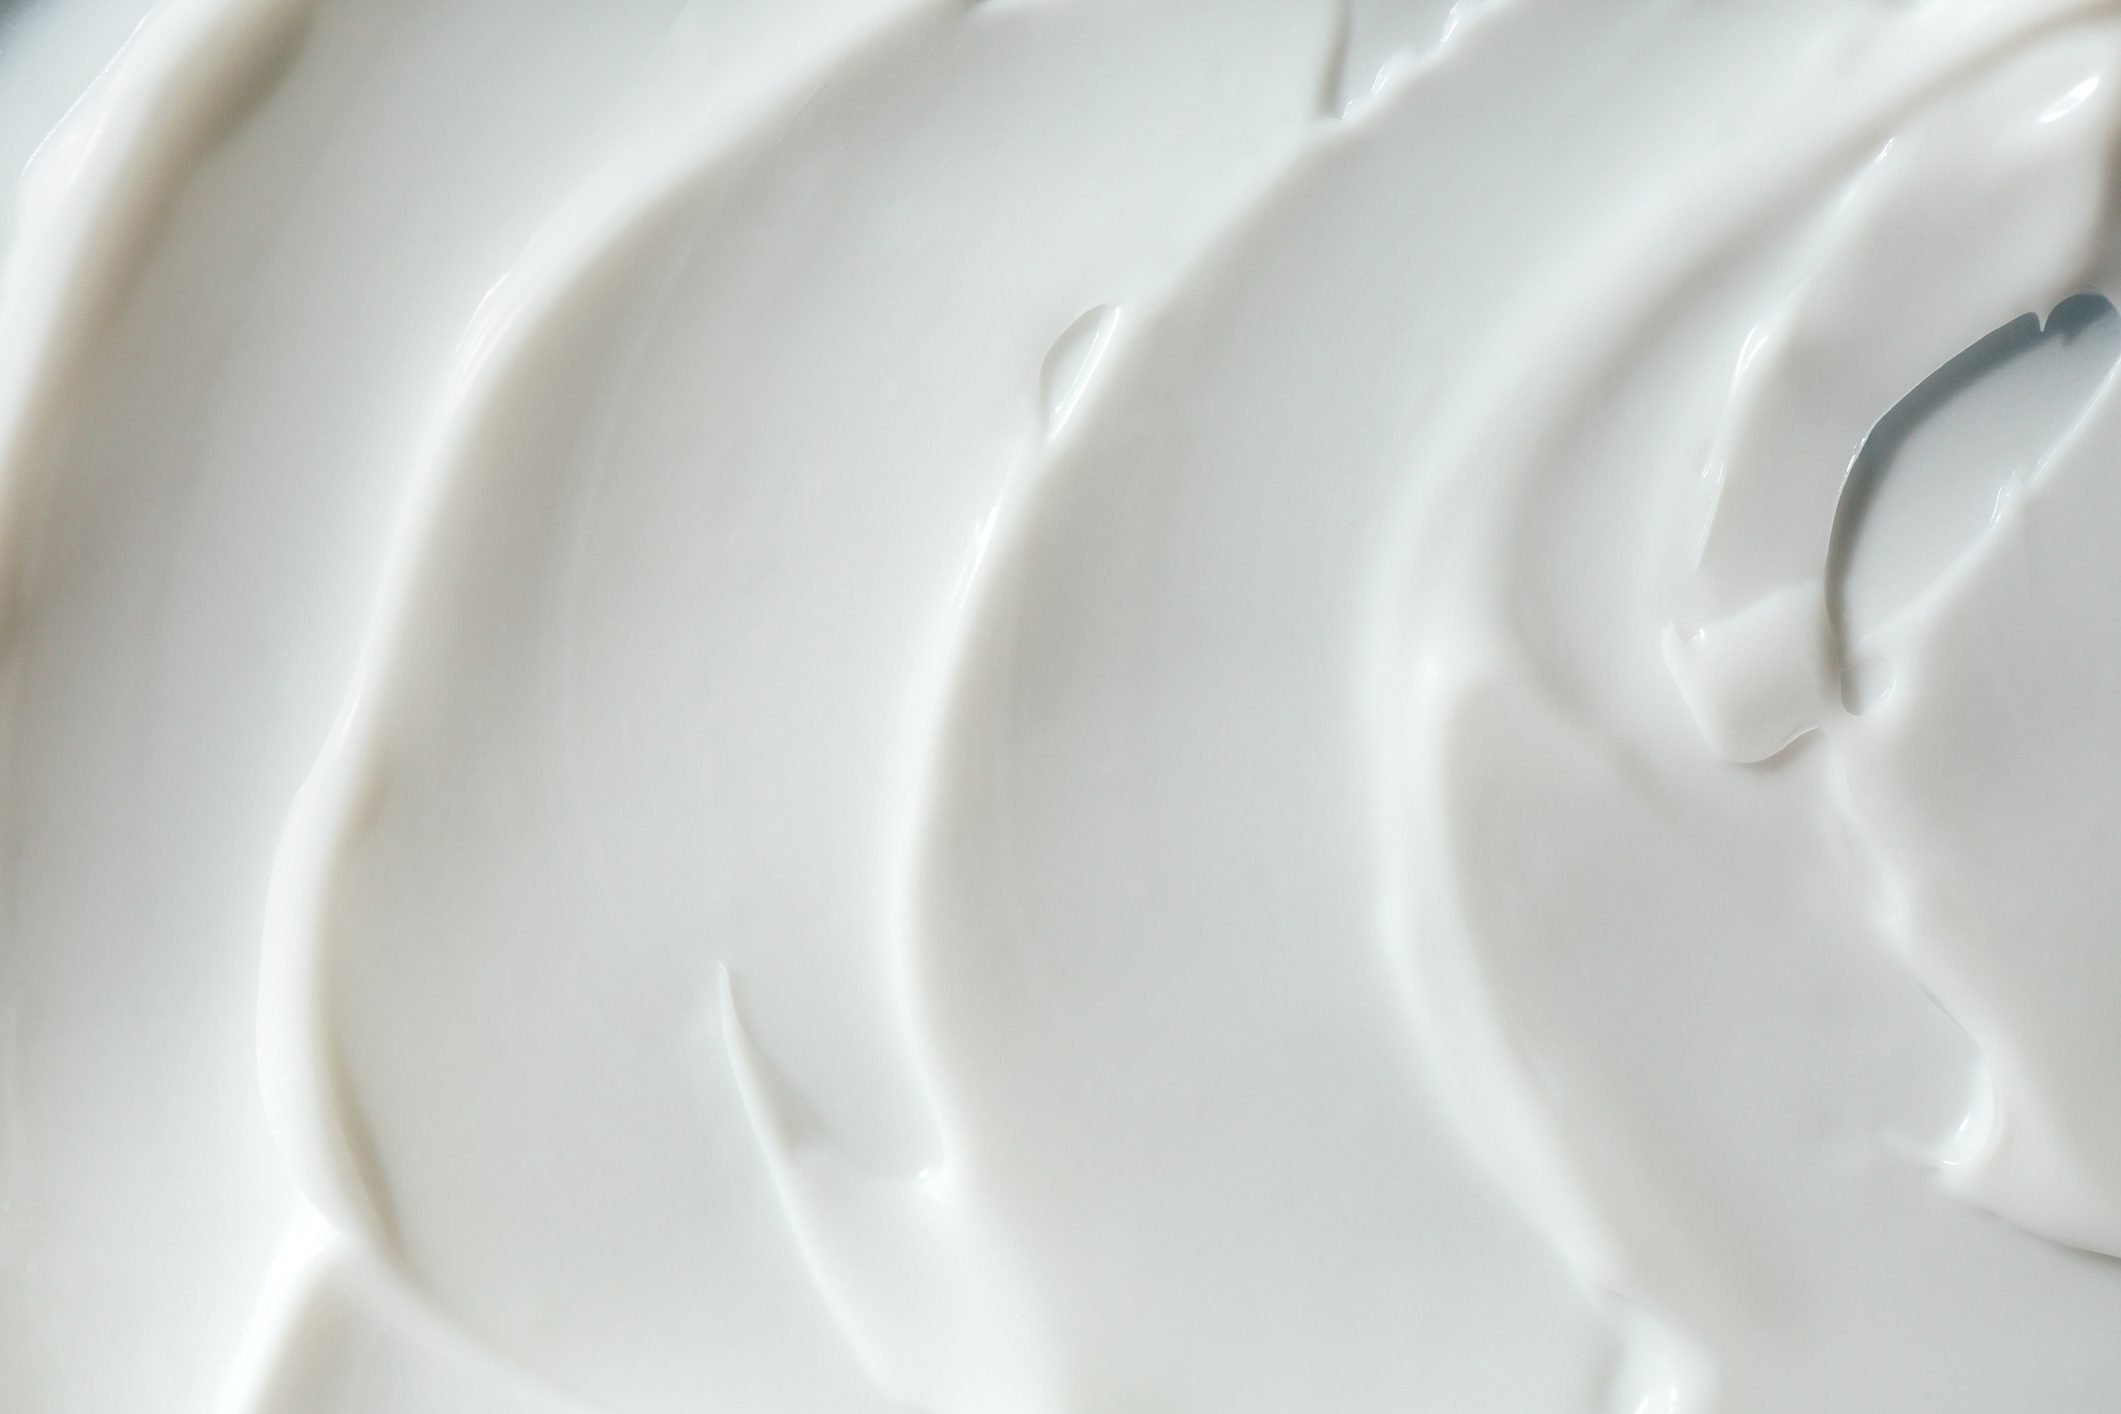 Nearly 850,000 Cream Cheese Products Have Been Recalled in 19 States and Puerto Rico